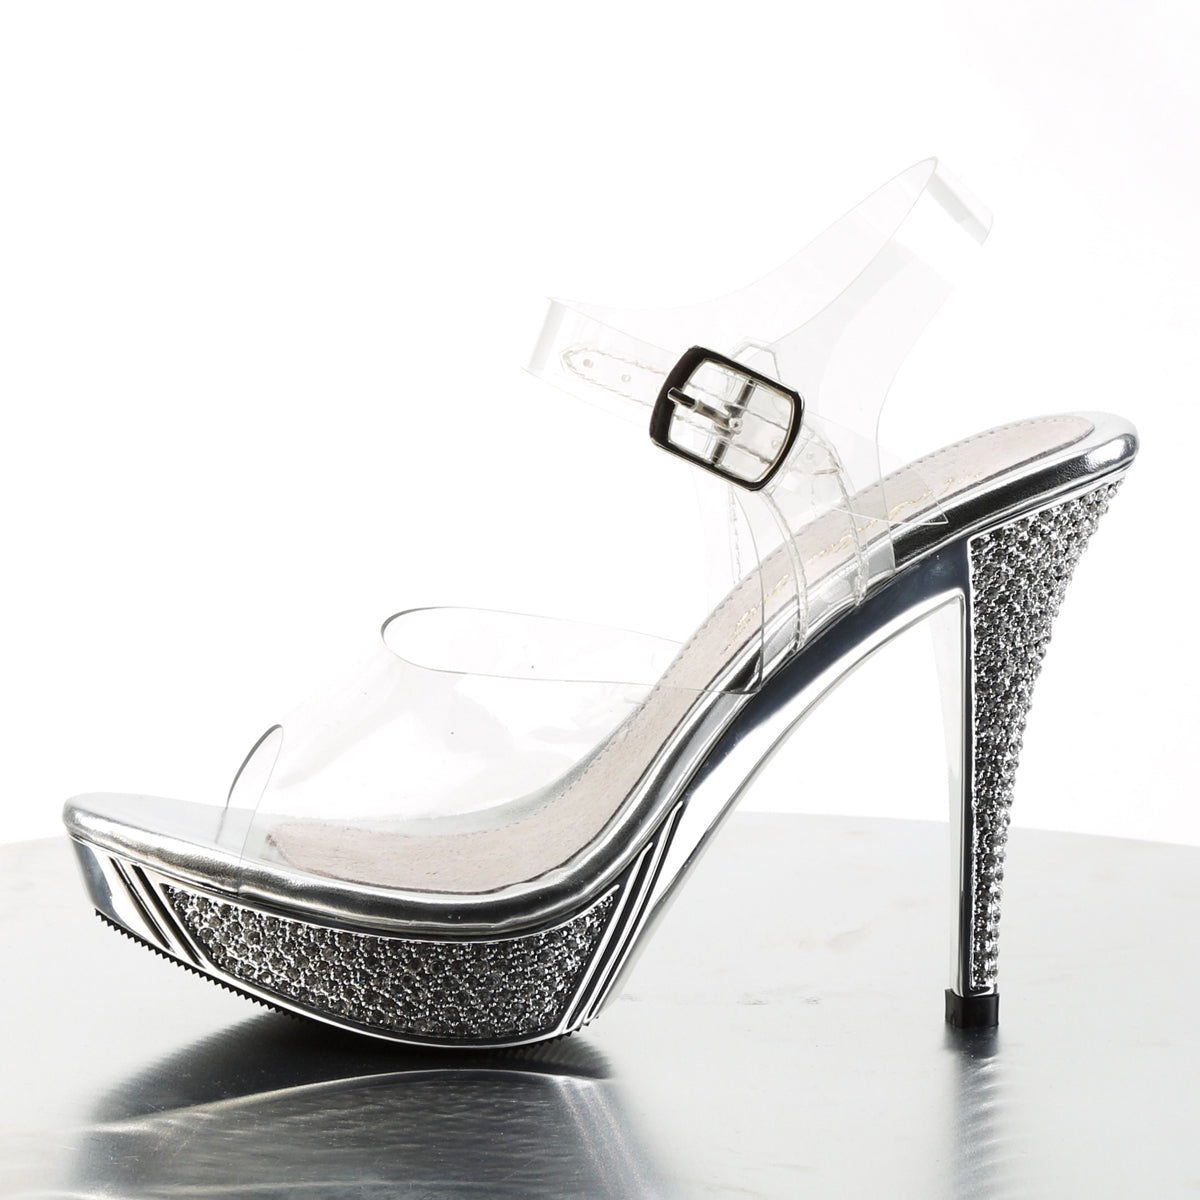 ELEGANT-408 Fabulicious Clear/Silver Chrome Shoes [Posing Heels]